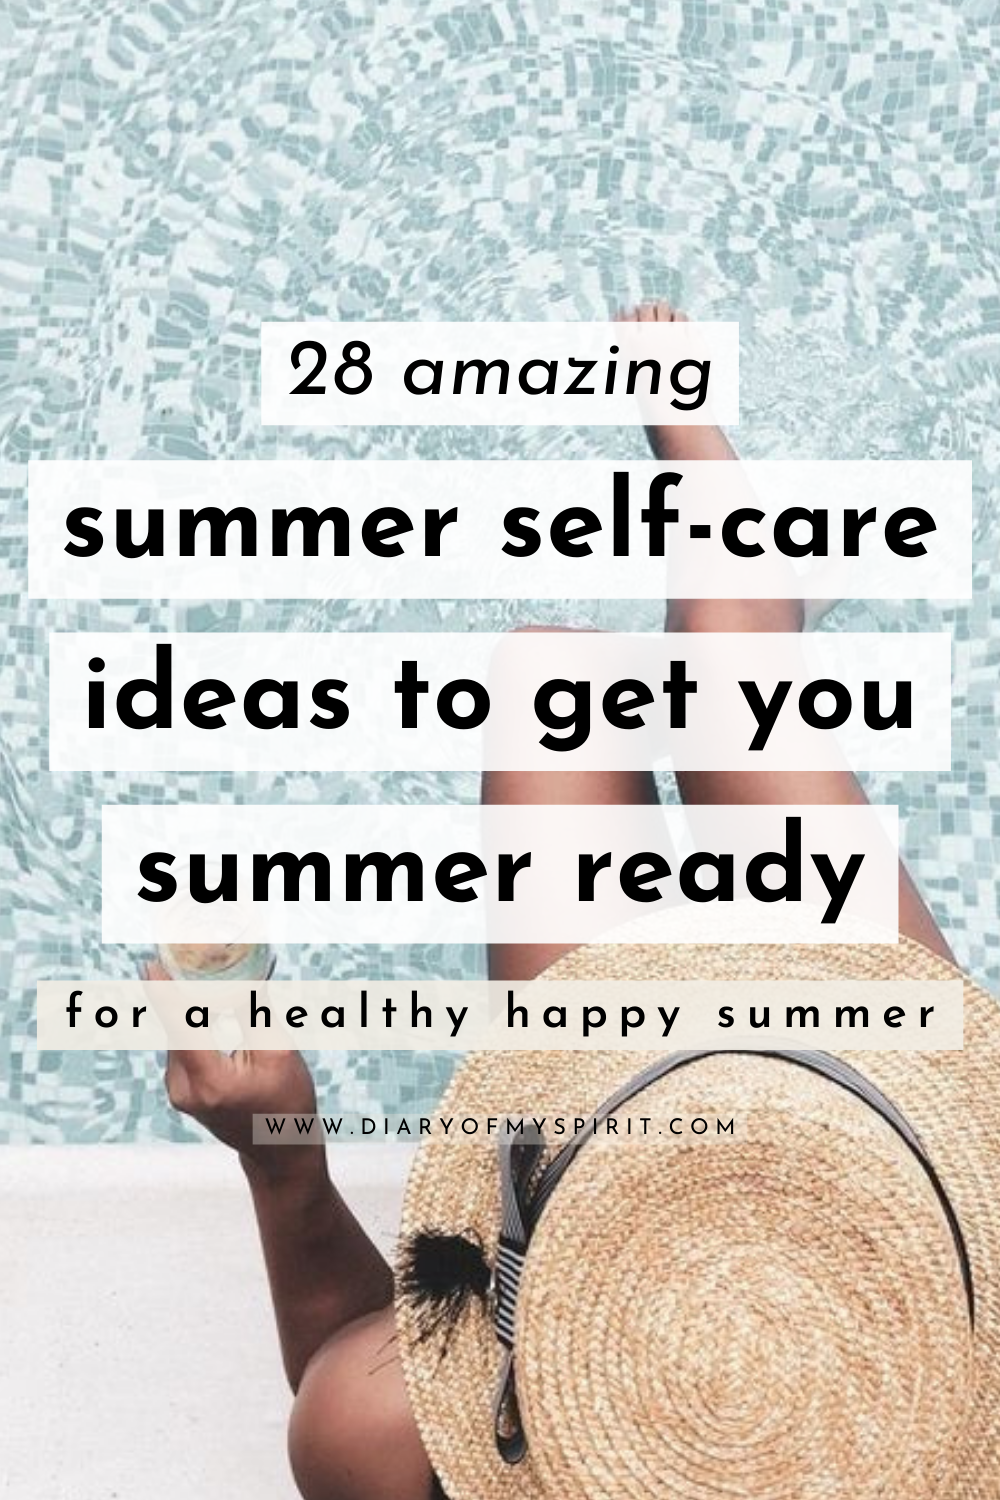 selfcare ideas for the summer. Summer self-care ideas, health and wellness tips for the summer